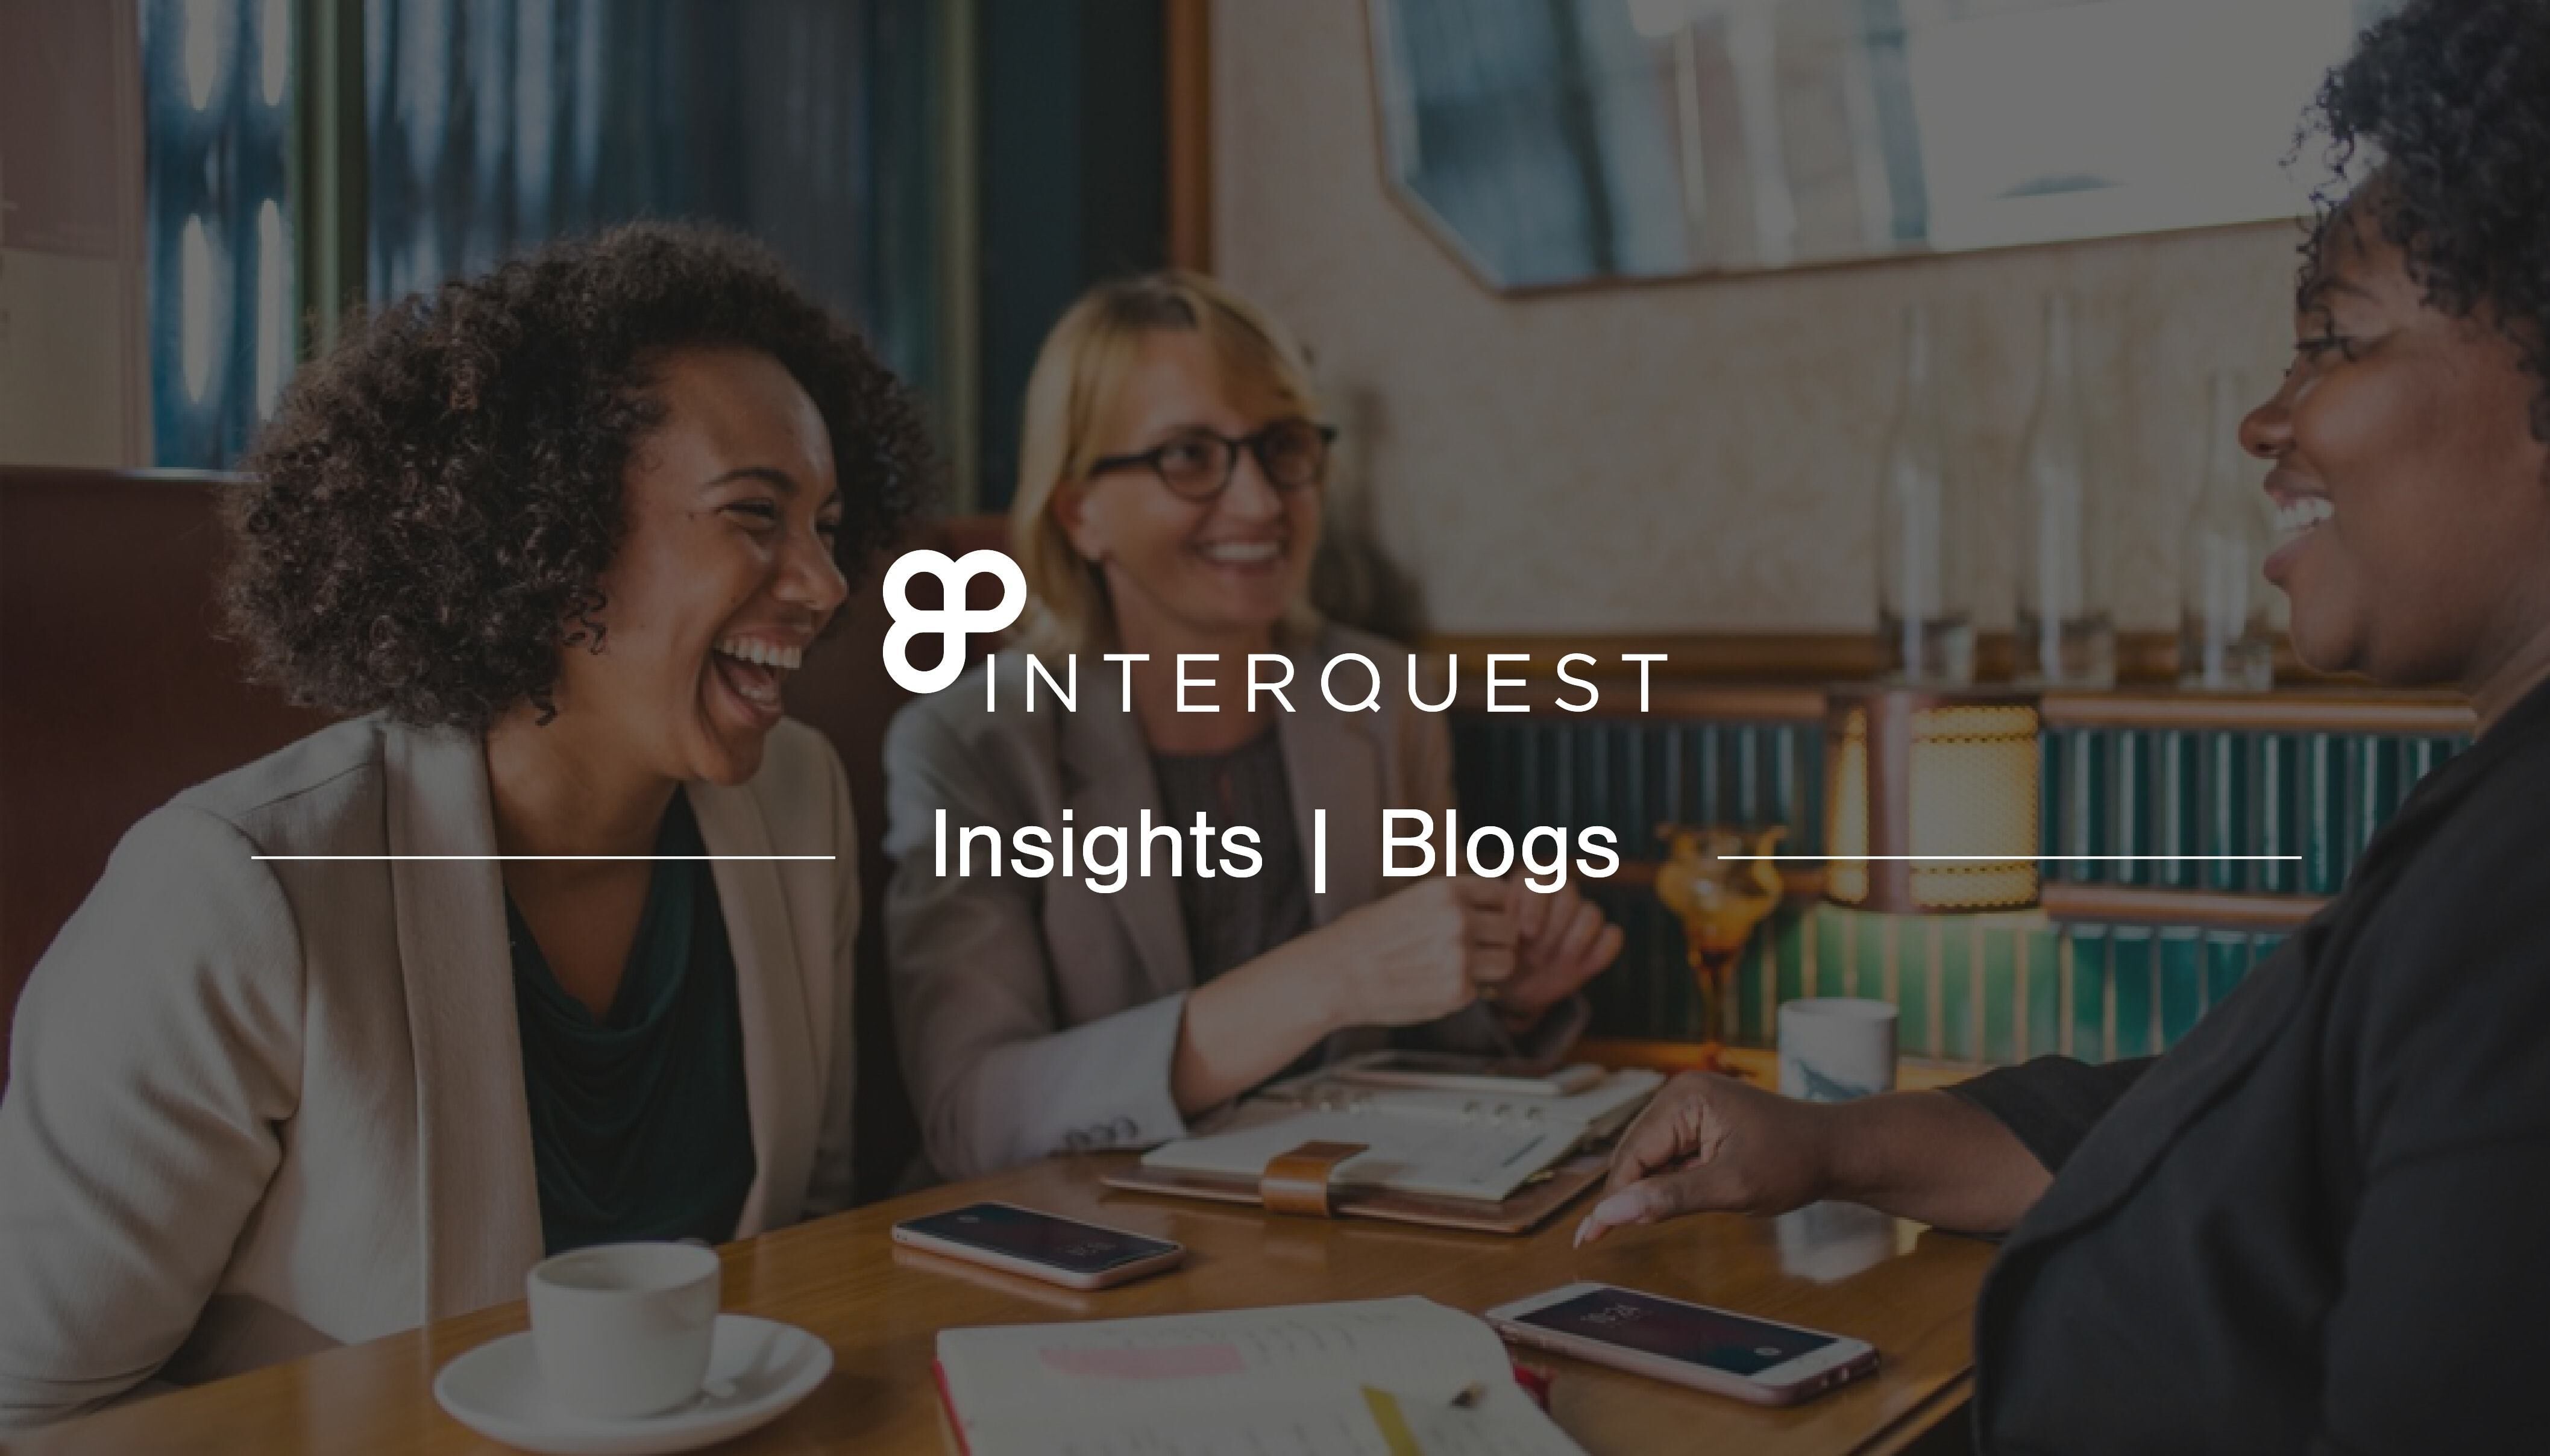 InterQuest insights blogs banner background image of three people talking at a table with cups of coffee